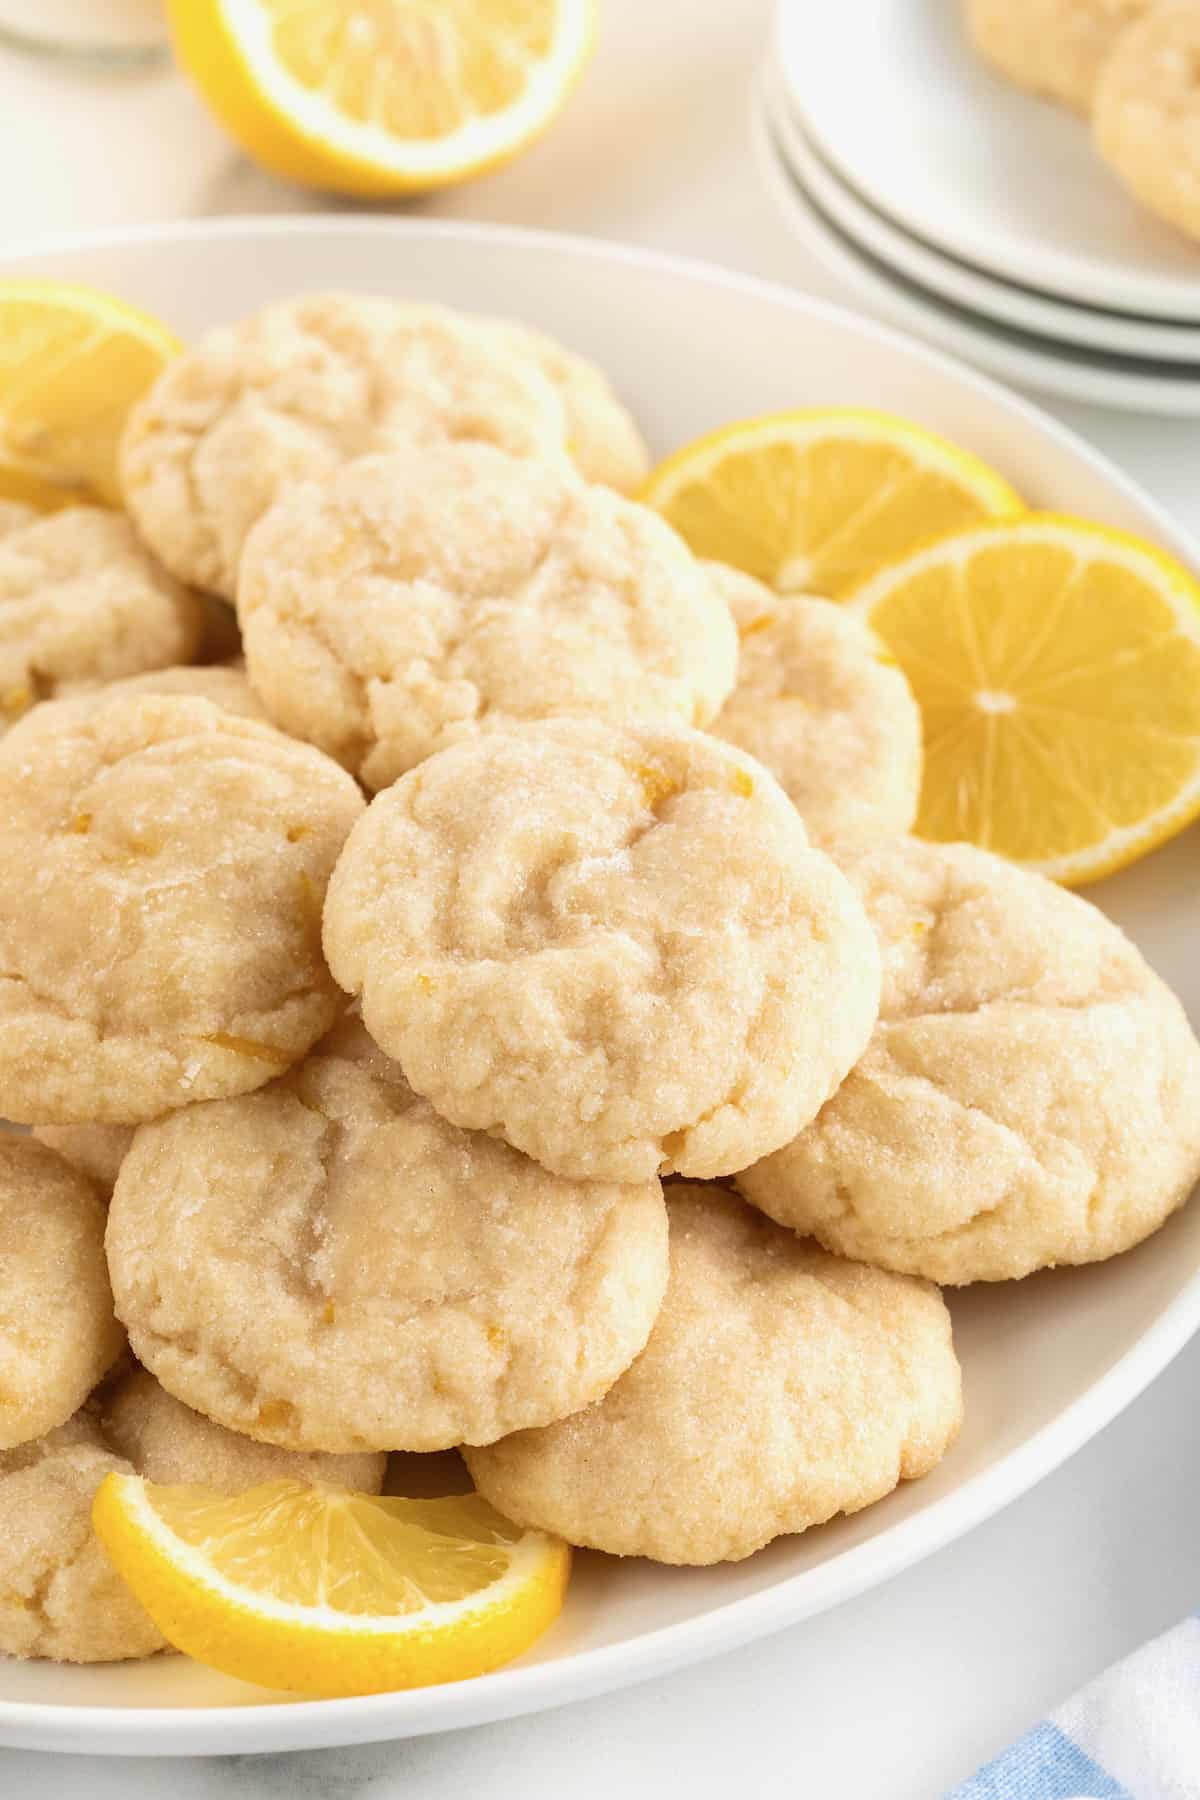 A large white round serving plate piled with lemon cookies dusted with sugar. There are two lemon slices garnishing the plate on the upper right hand.